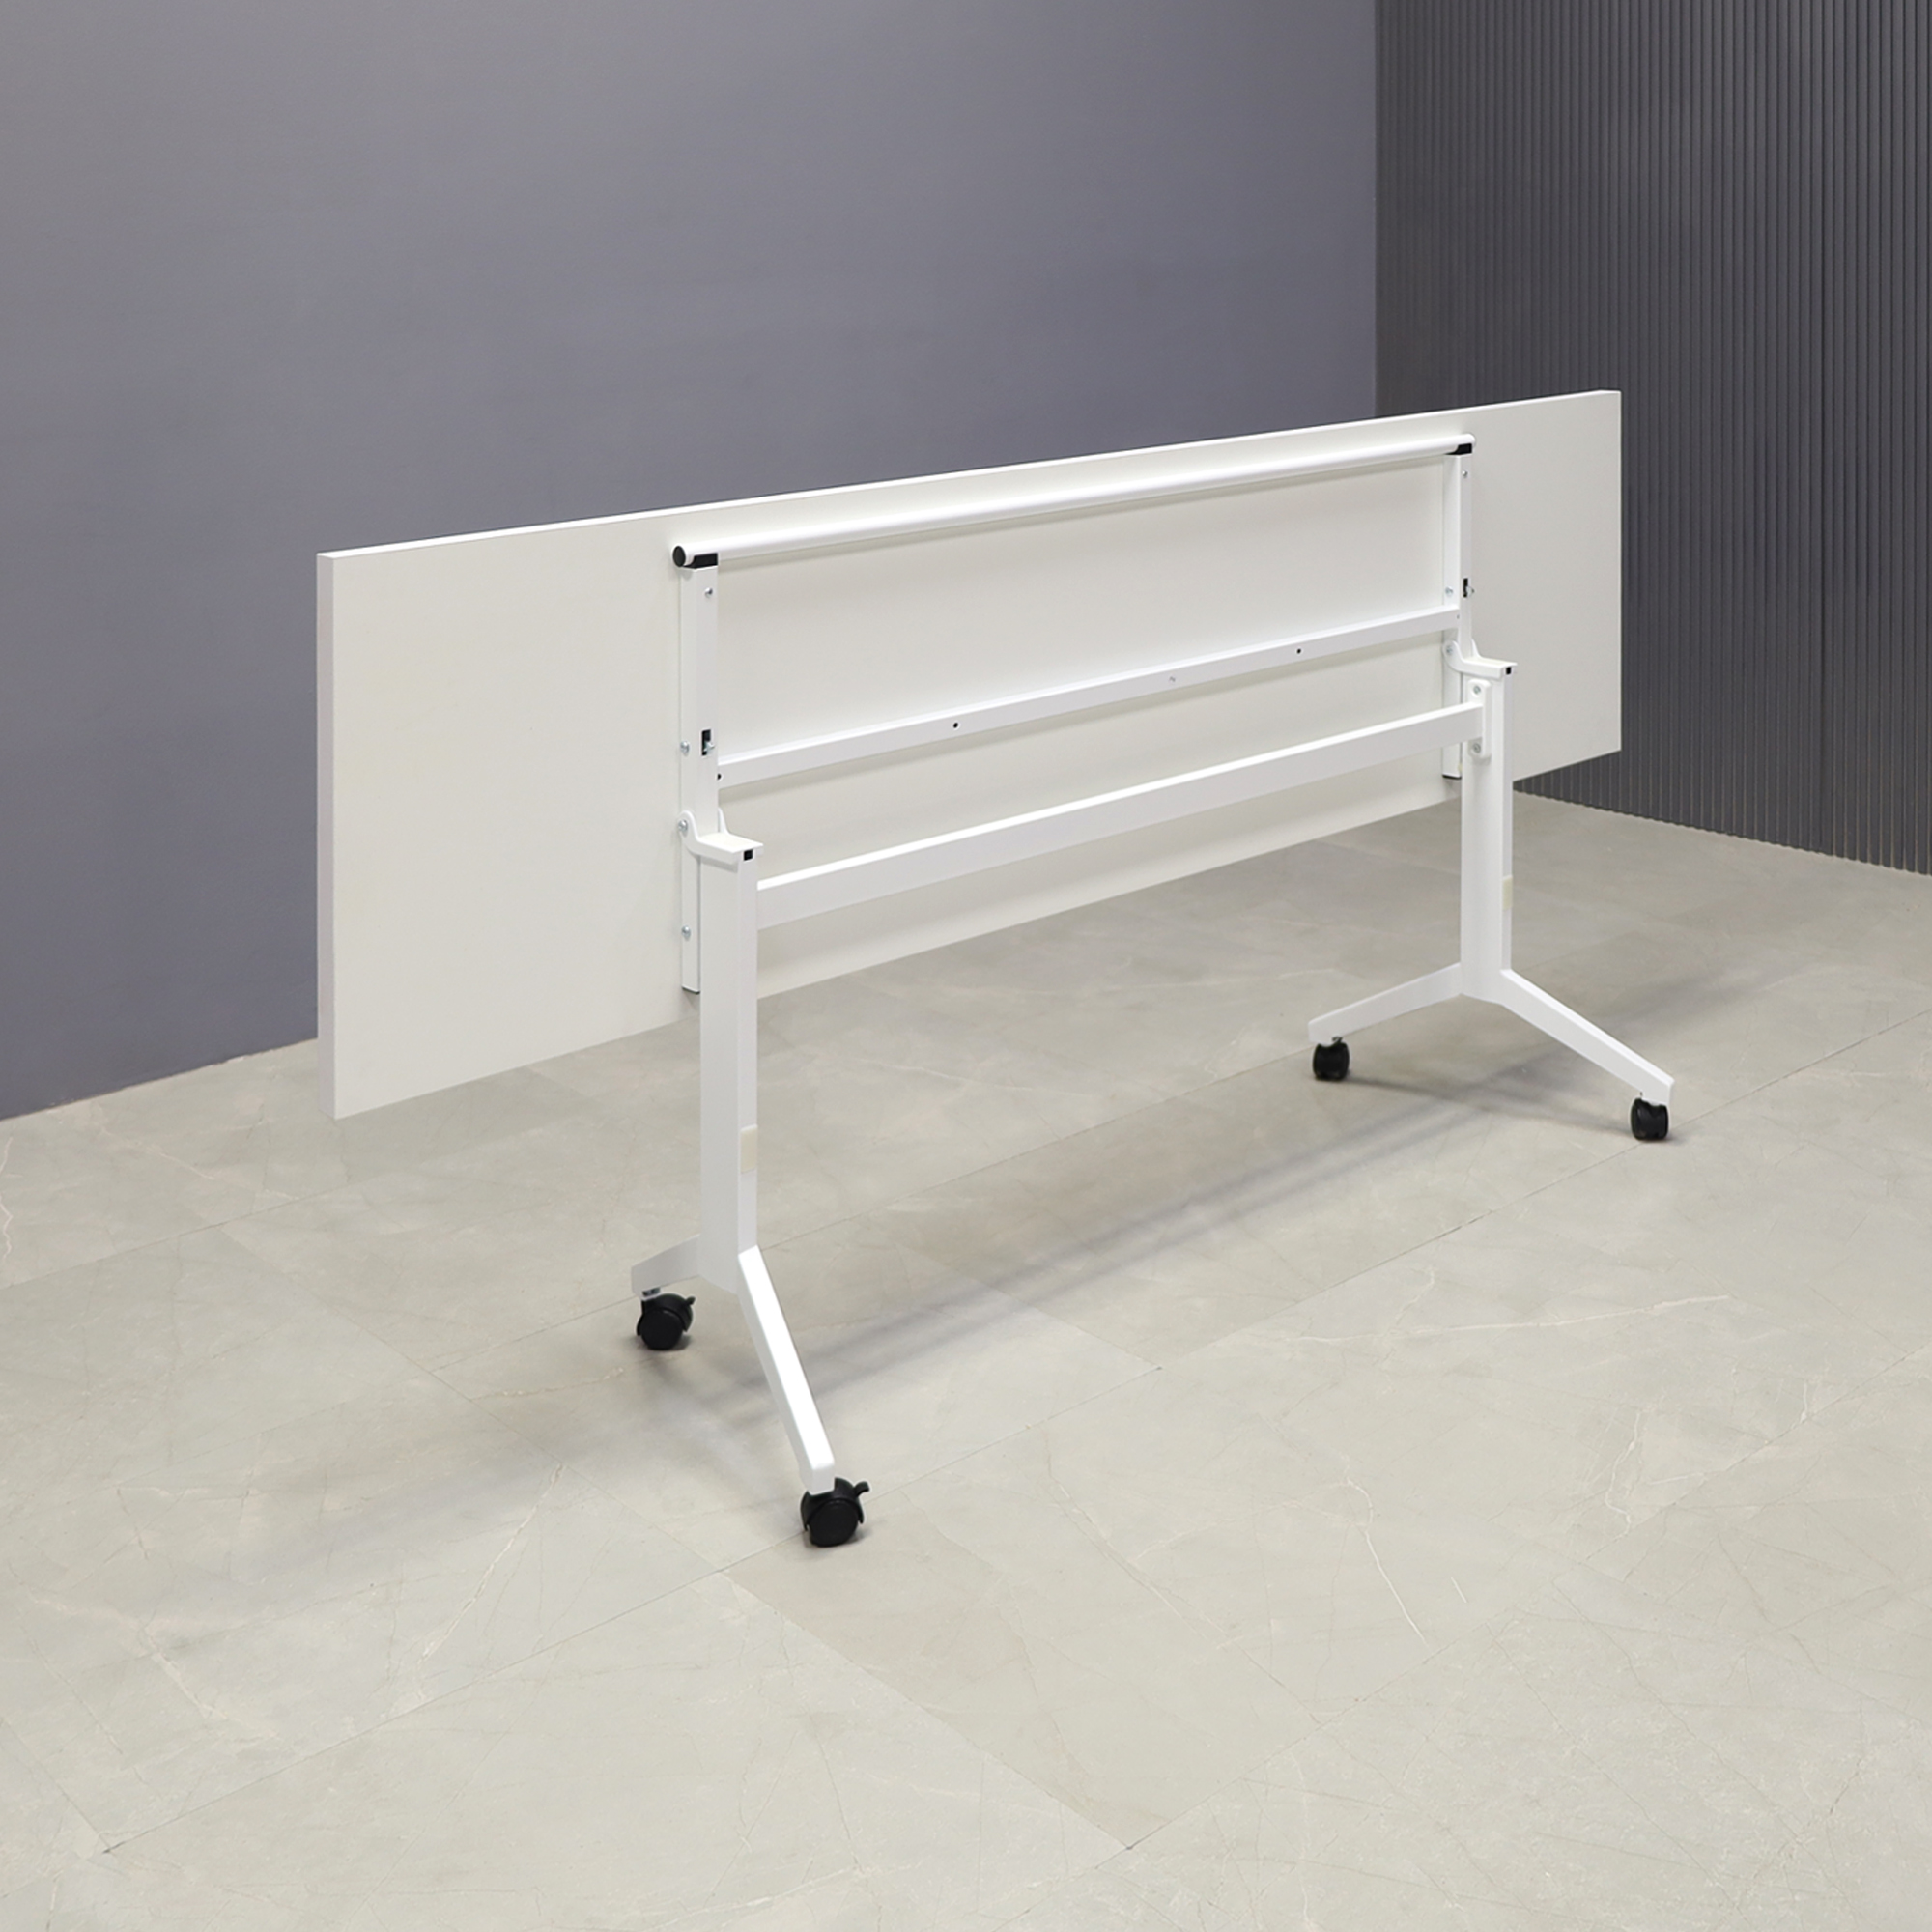 84-inch Westin Rectangular Training Table in white matte laminate top and white frame, shown here.